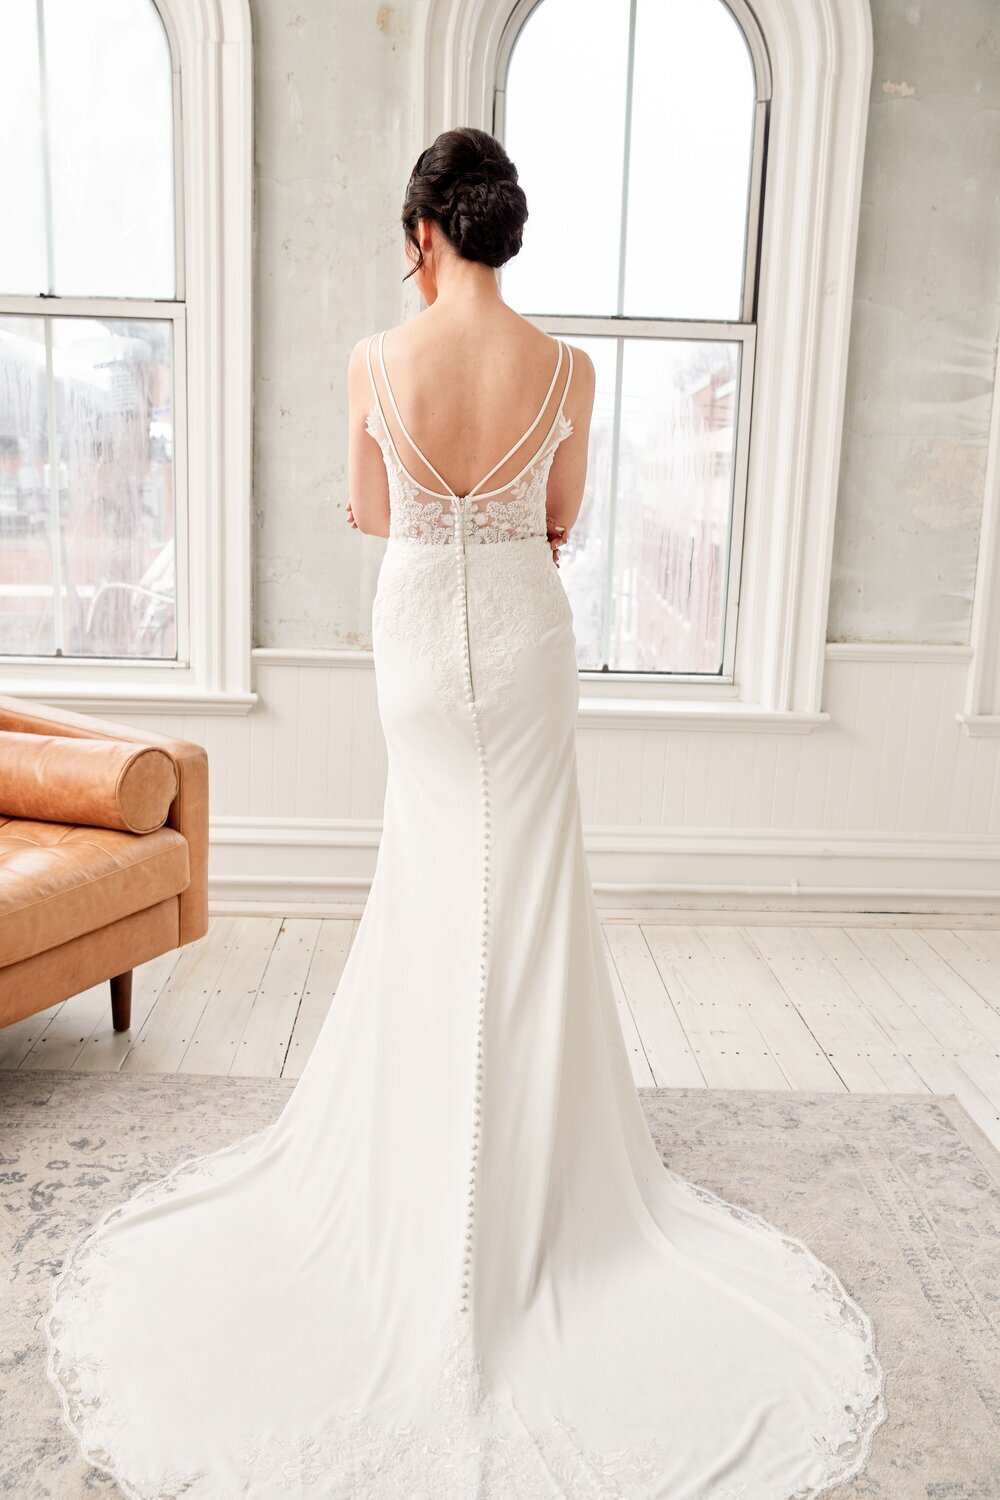 What You Need to Know About Renting Wedding Gowns